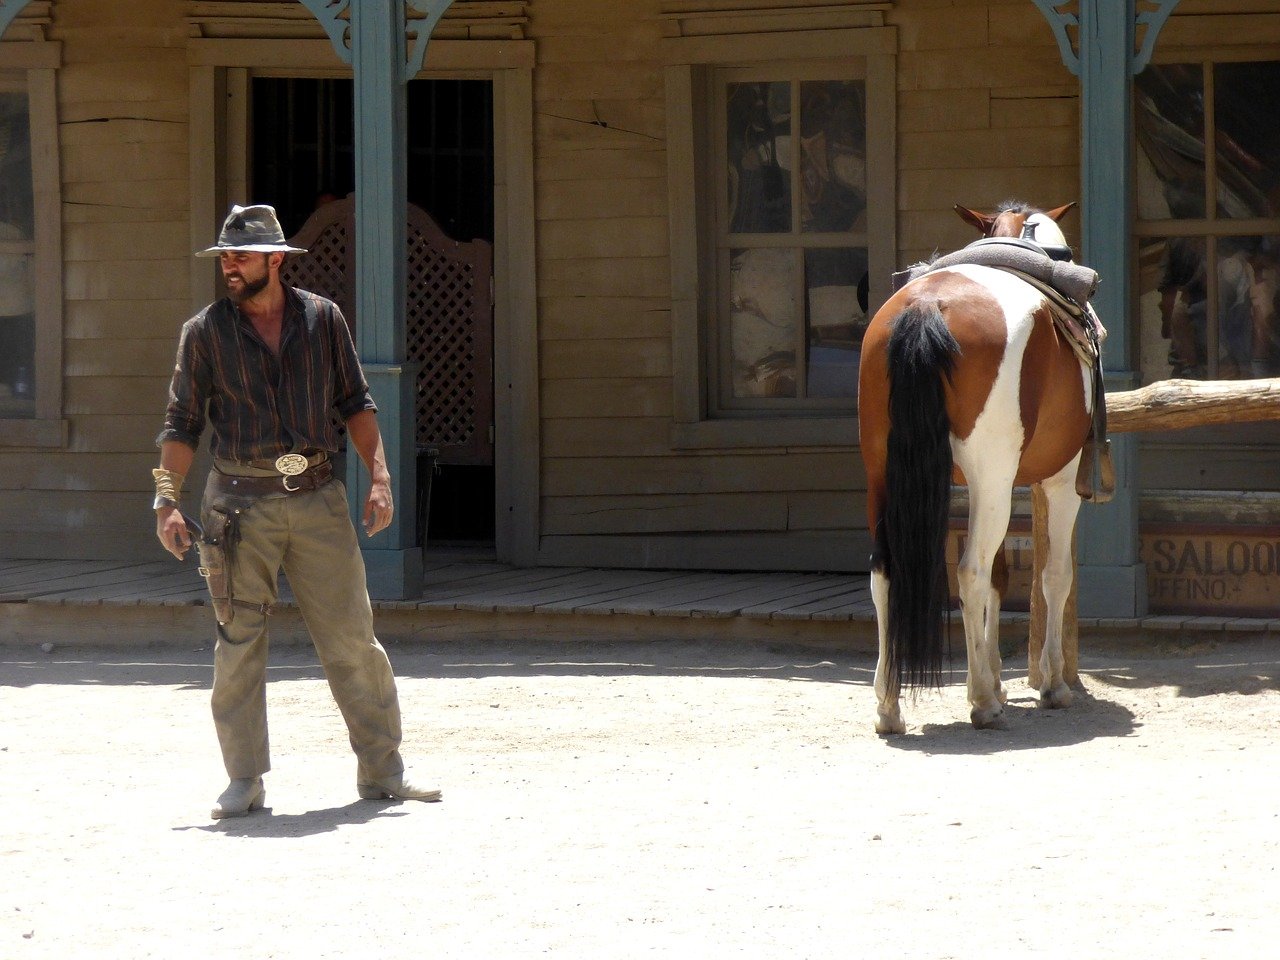 A cowboy looking confused as he looks around with a horse close by | Photo: Pixabay/Pashi